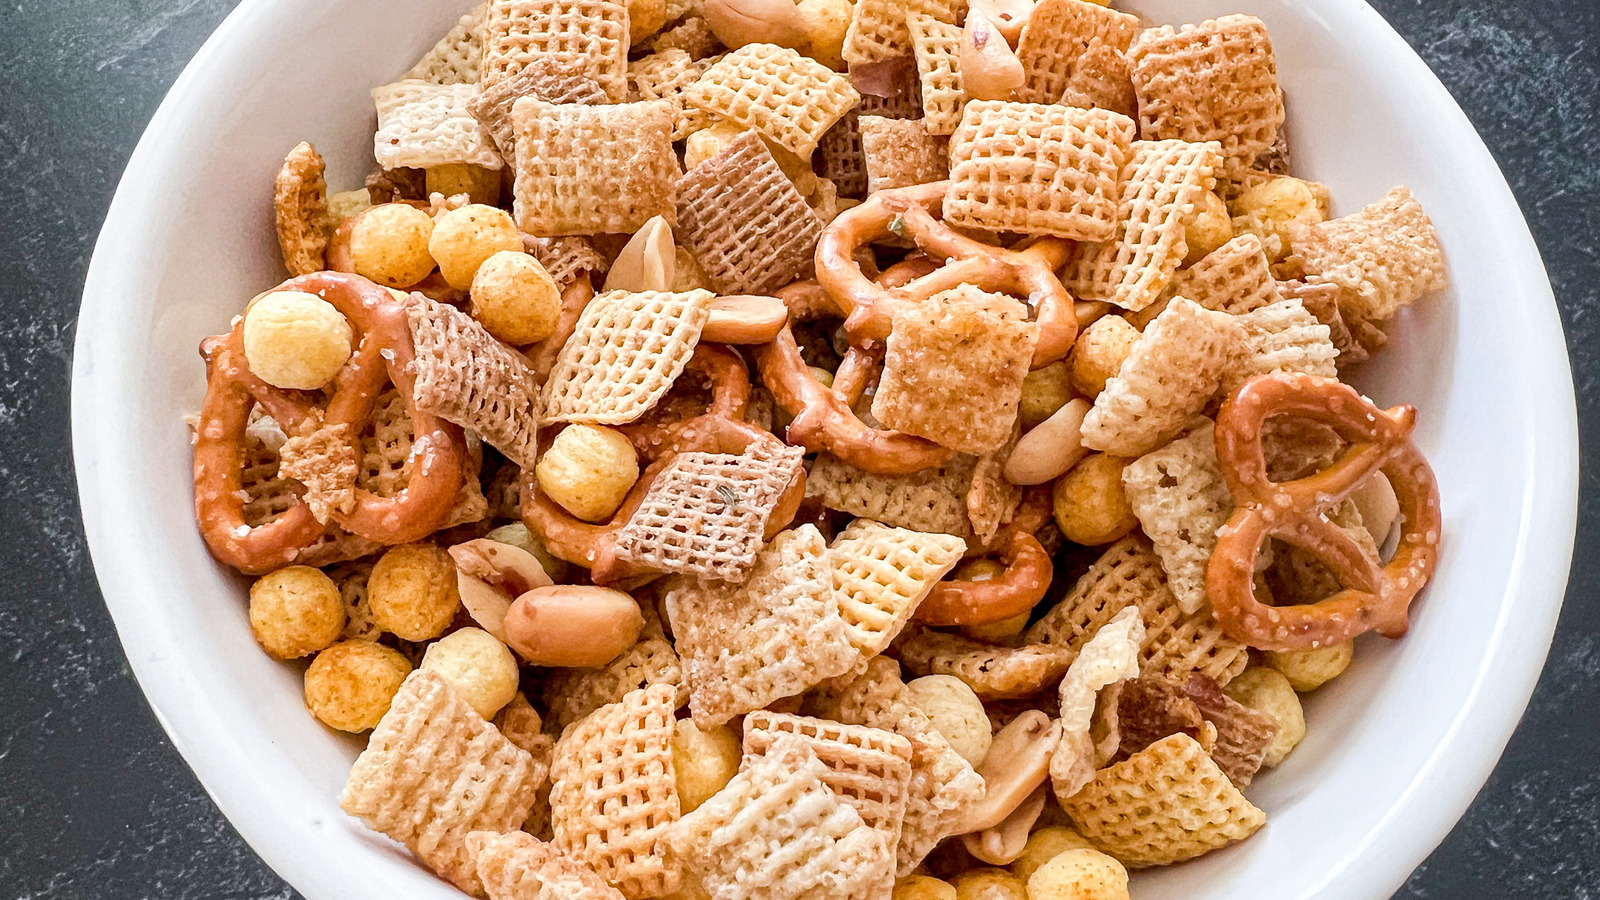 https://www.thedailymeal.com/img/gallery/at-home-chex-mix-recipe/l-intro-1672778353.jpg